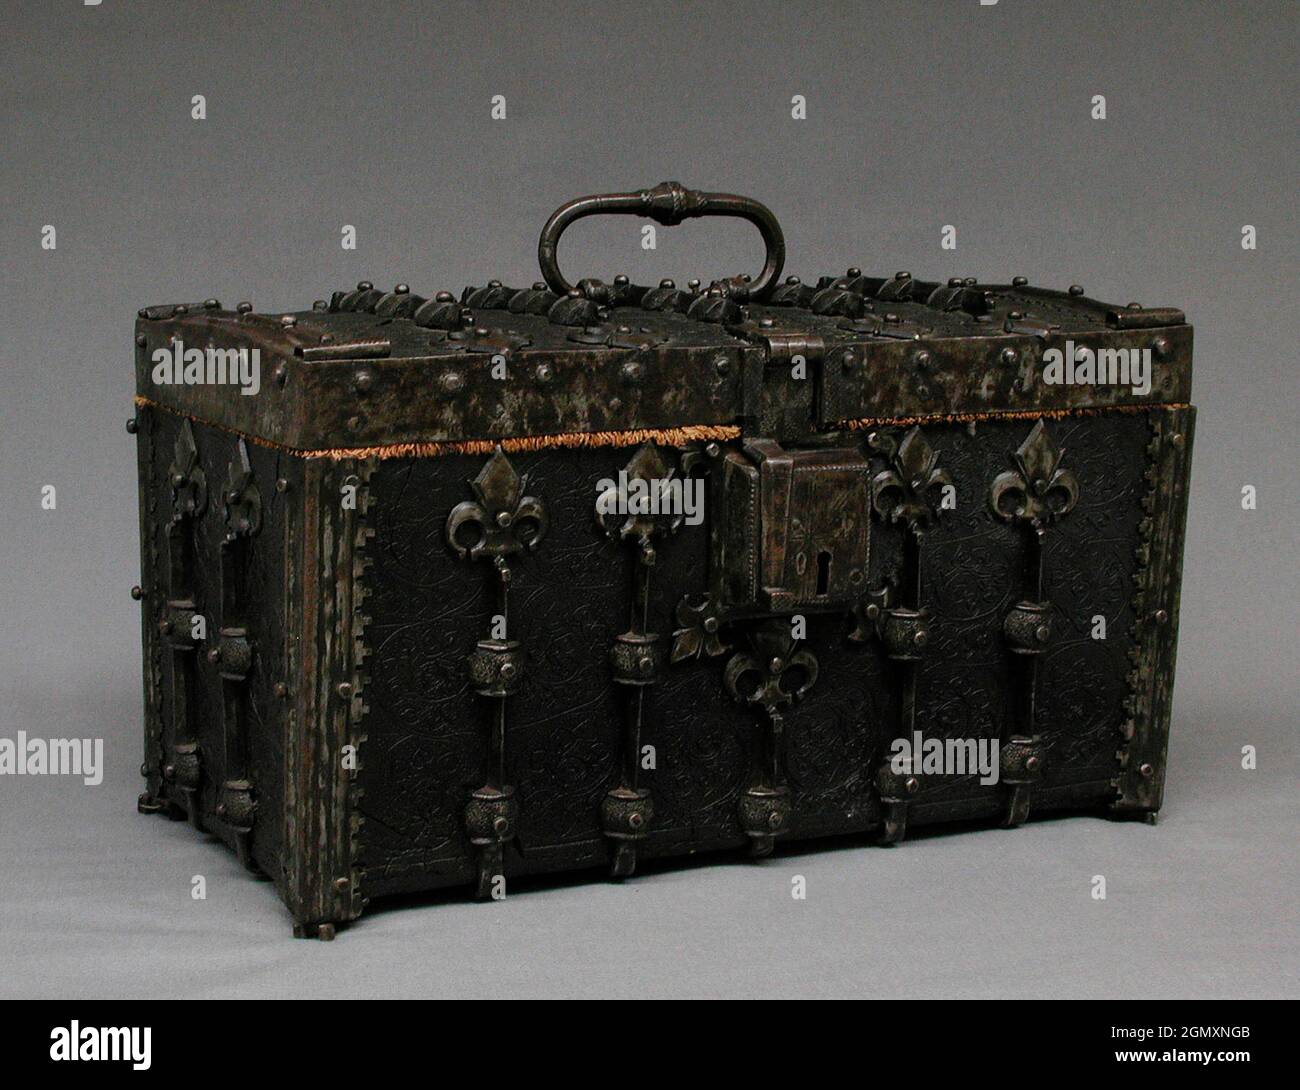 Coffer with key. Date: 16th century; Culture: French; Medium: Iron, leather, oak; Dimensions: Coffer 8 1/2 x 14 1/2 x 8 1/4 in. (21.6 x 36.8 x 21.0 Stock Photo